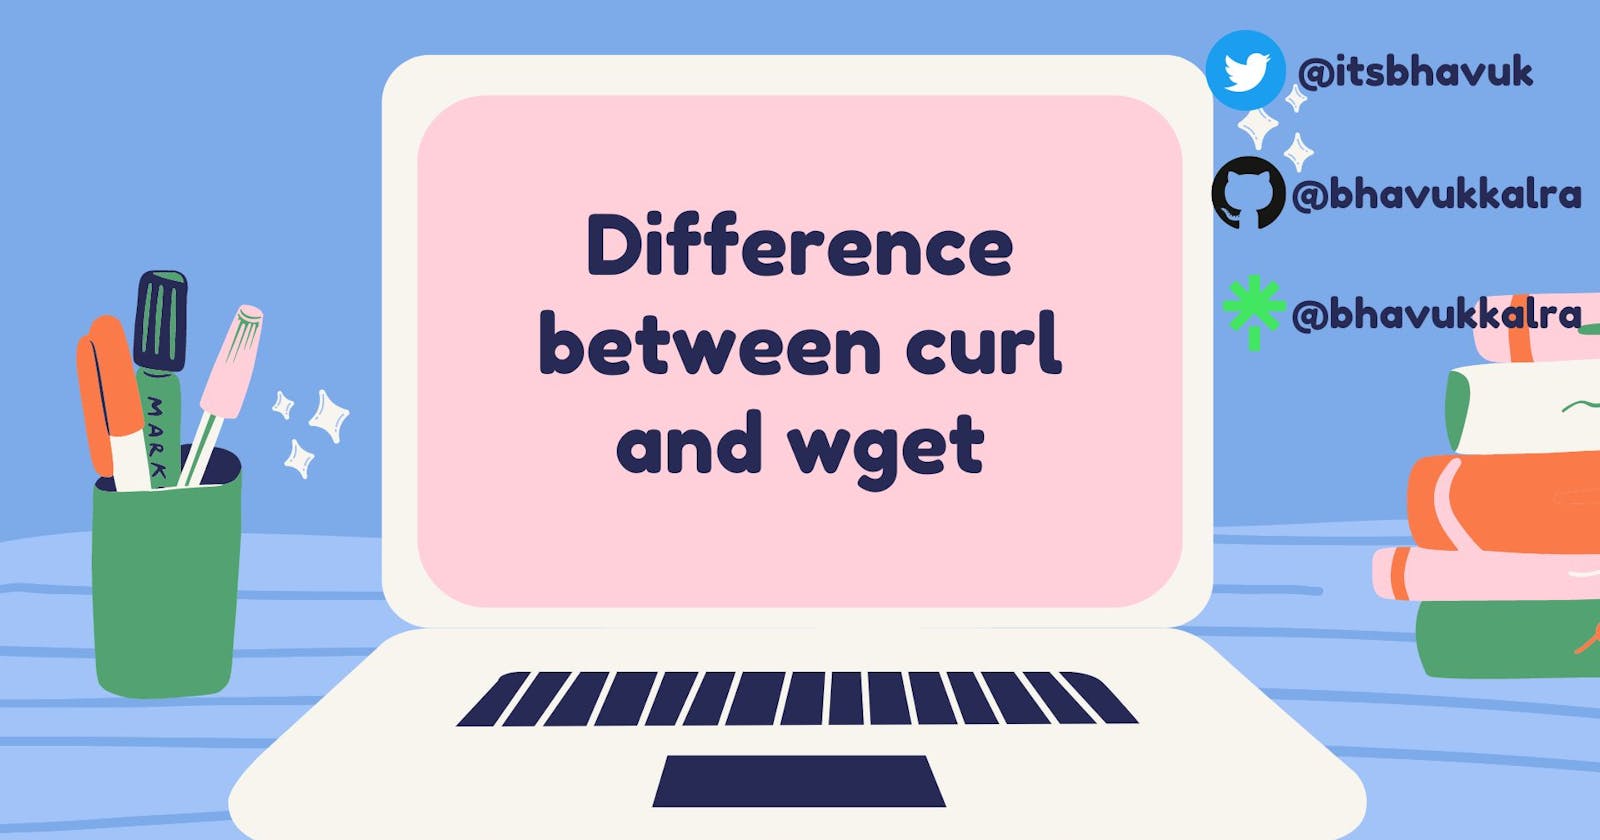 Difference between curl and wget